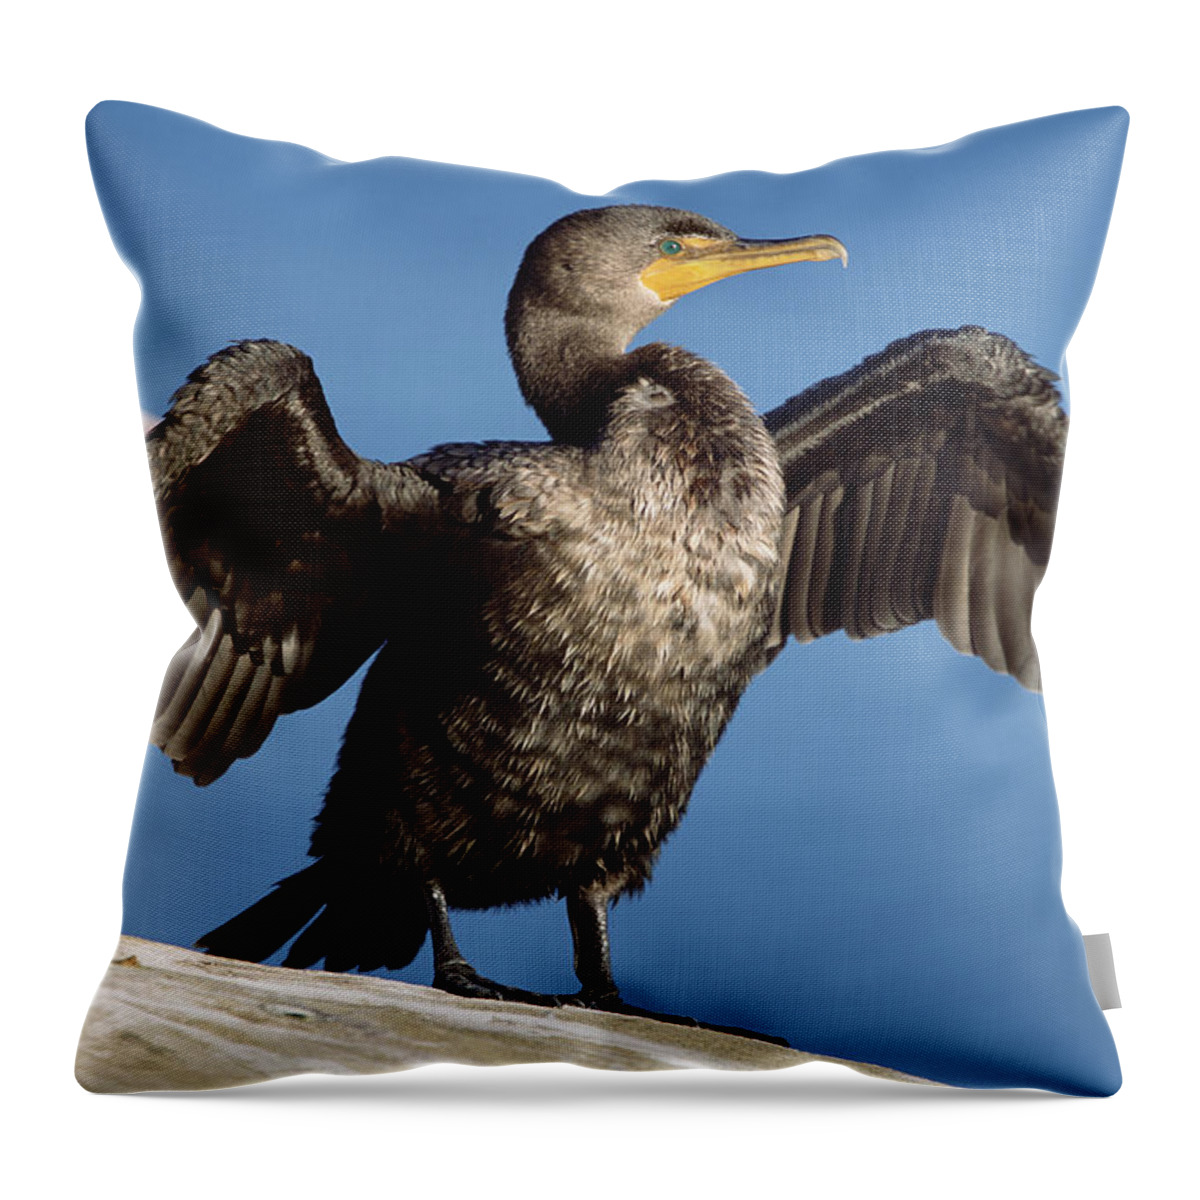 00173822 Throw Pillow featuring the photograph Double Crested Cormorant Drying Wings by Tim Fitzharris